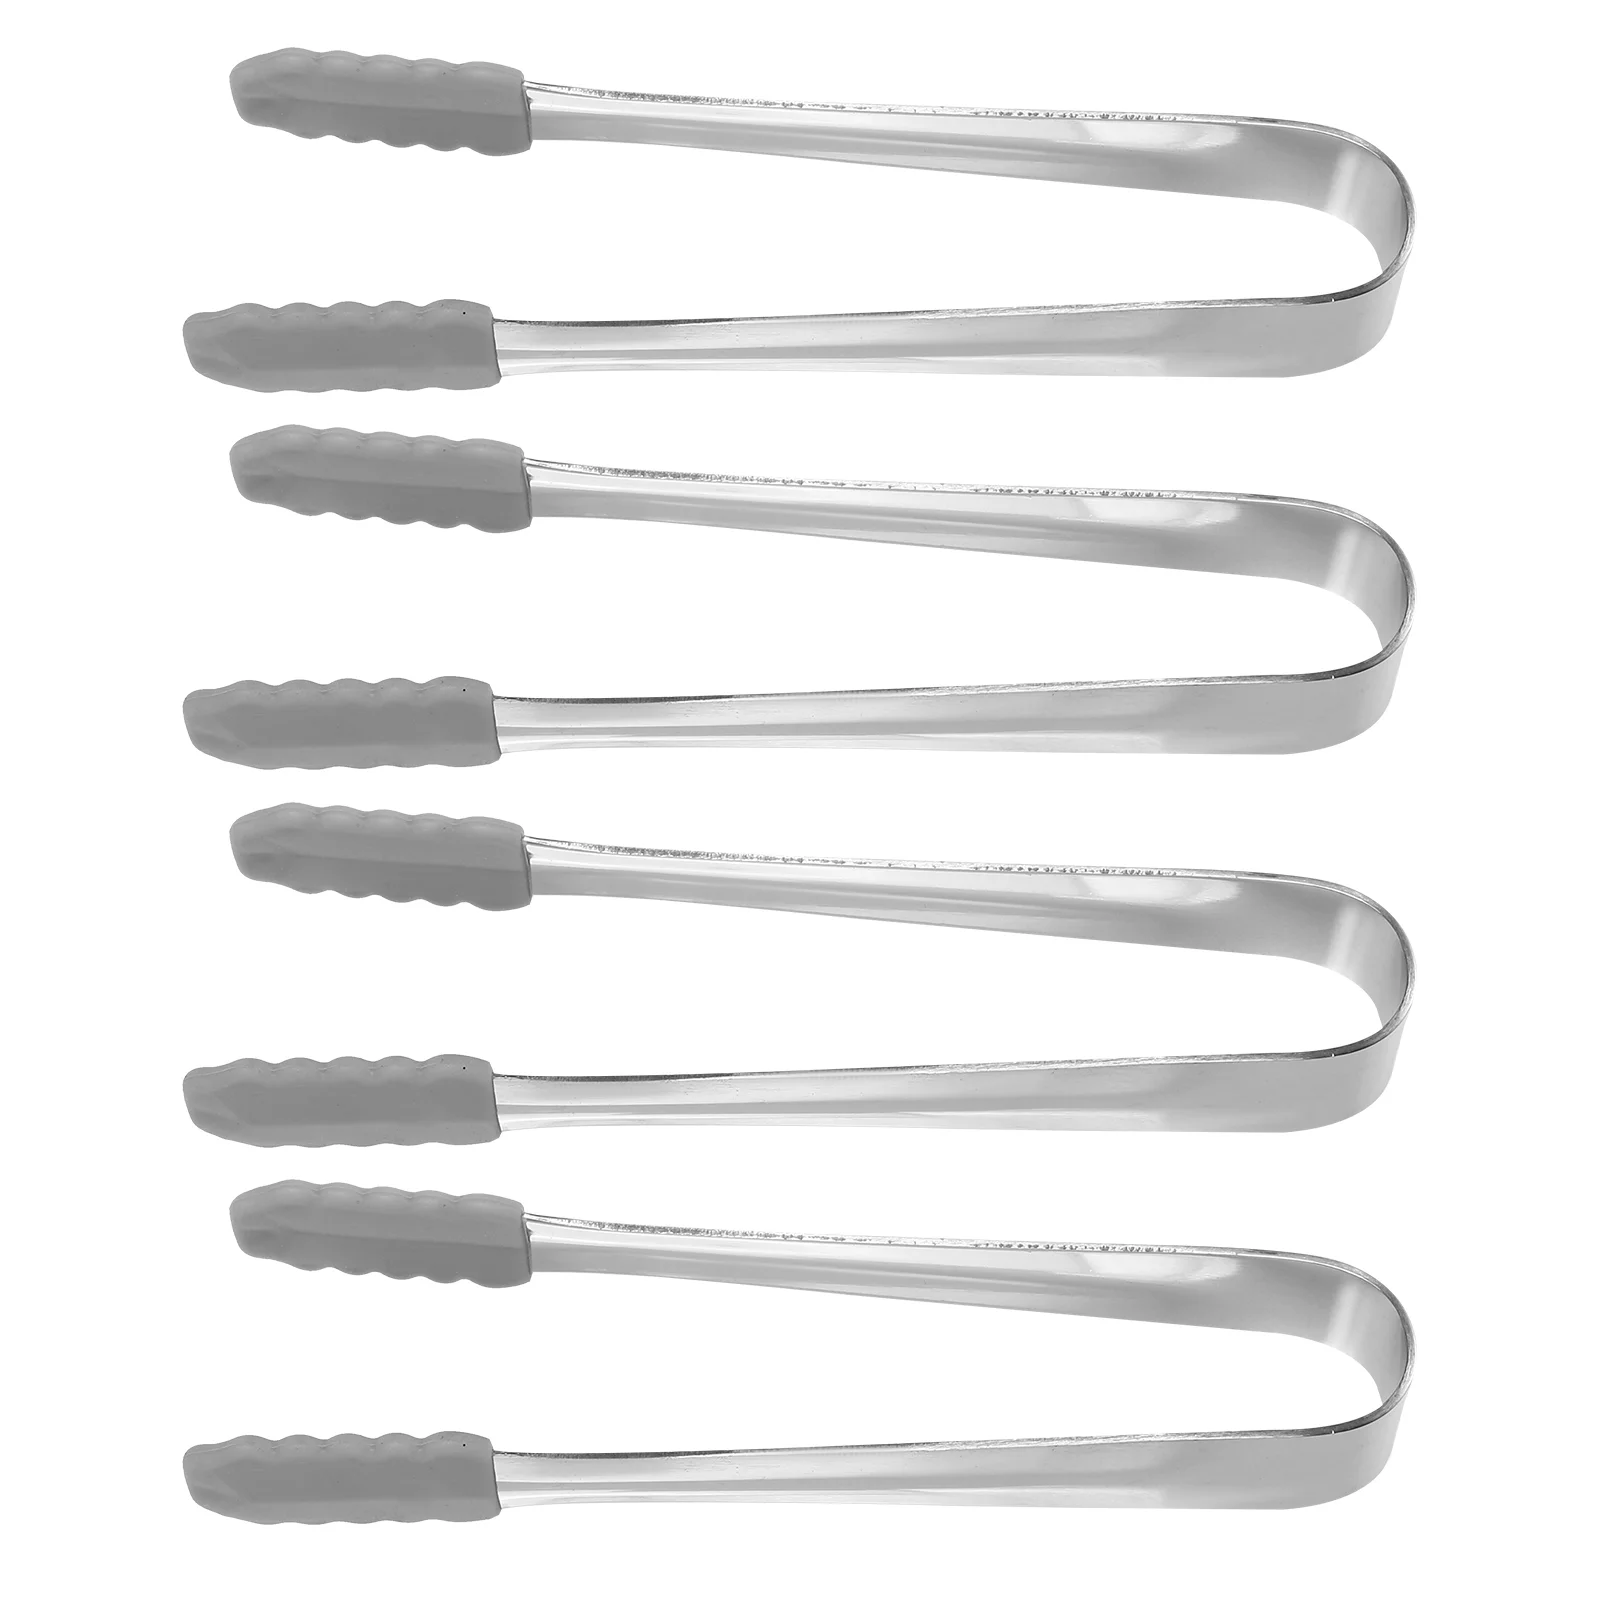 

4 Pcs Silicone Tipped Tongs Kitchen Tips Spatula Metal Chef Small Serving Utensils Stainless Steel Toaster Ice Cube